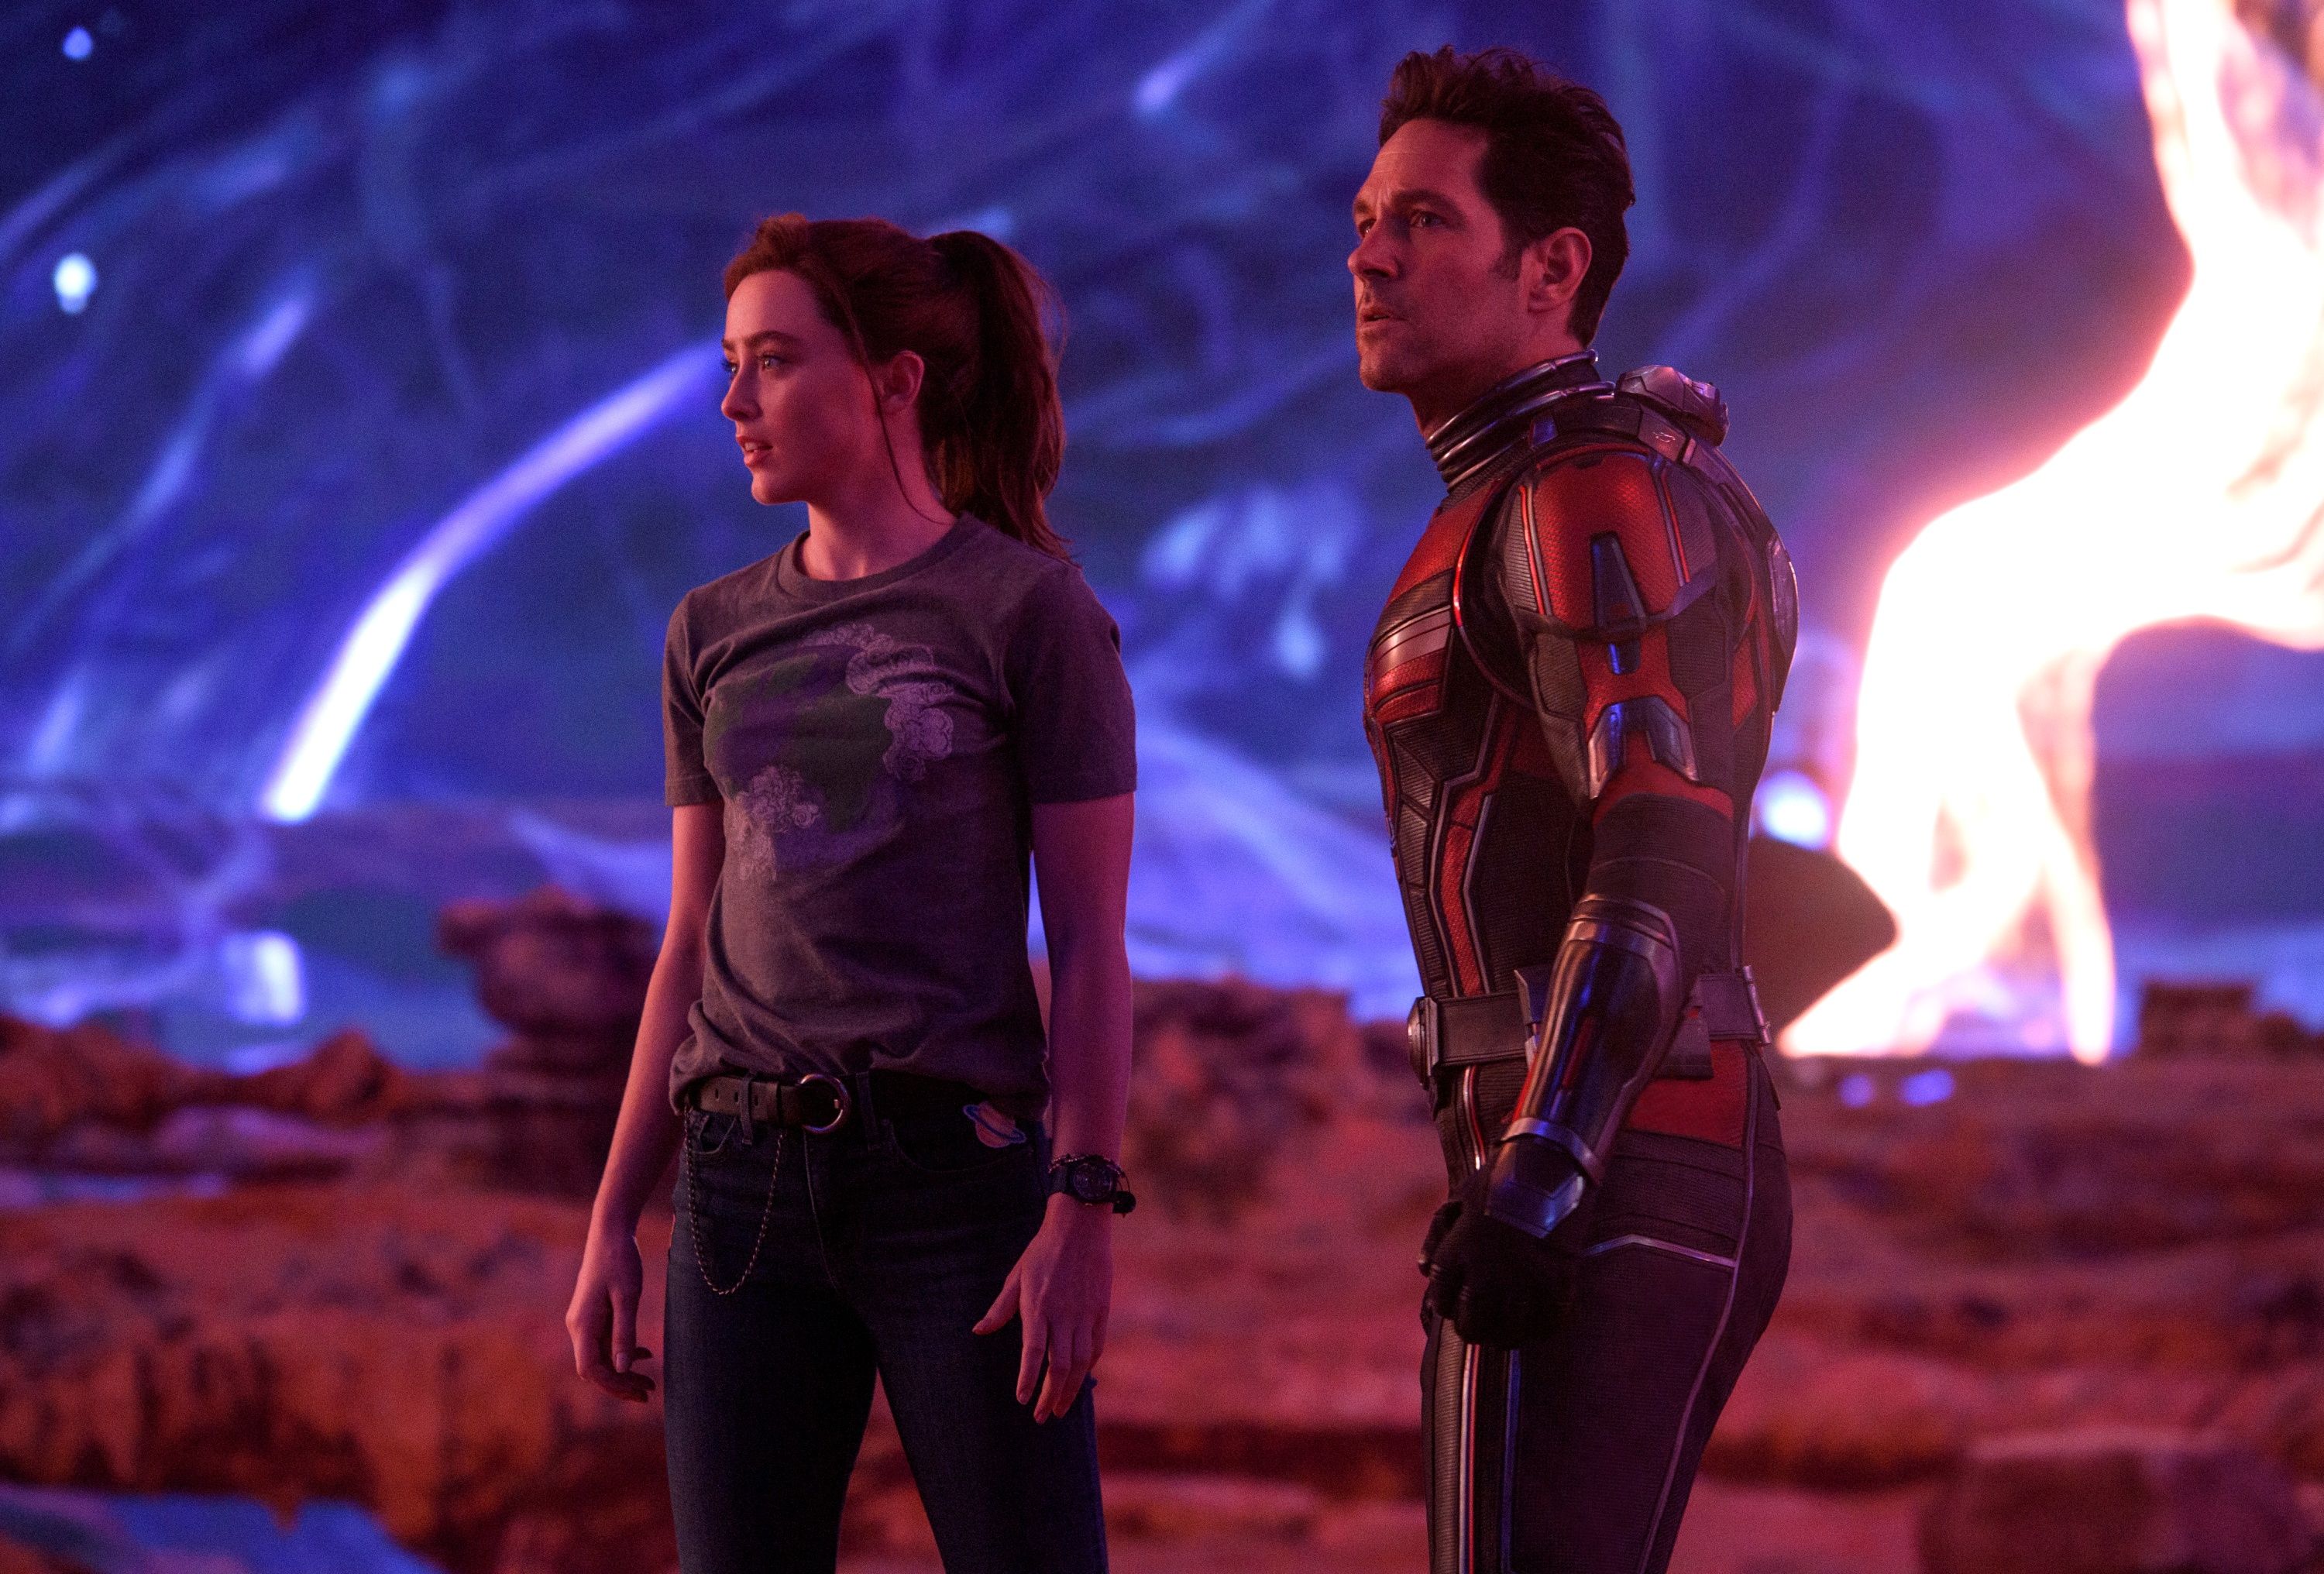 Paul Rudd as Scott Lang and Kathryn Newton as Cassie Lang in the Quantum Realm in Ant-Man and The Wasp: Quantumania